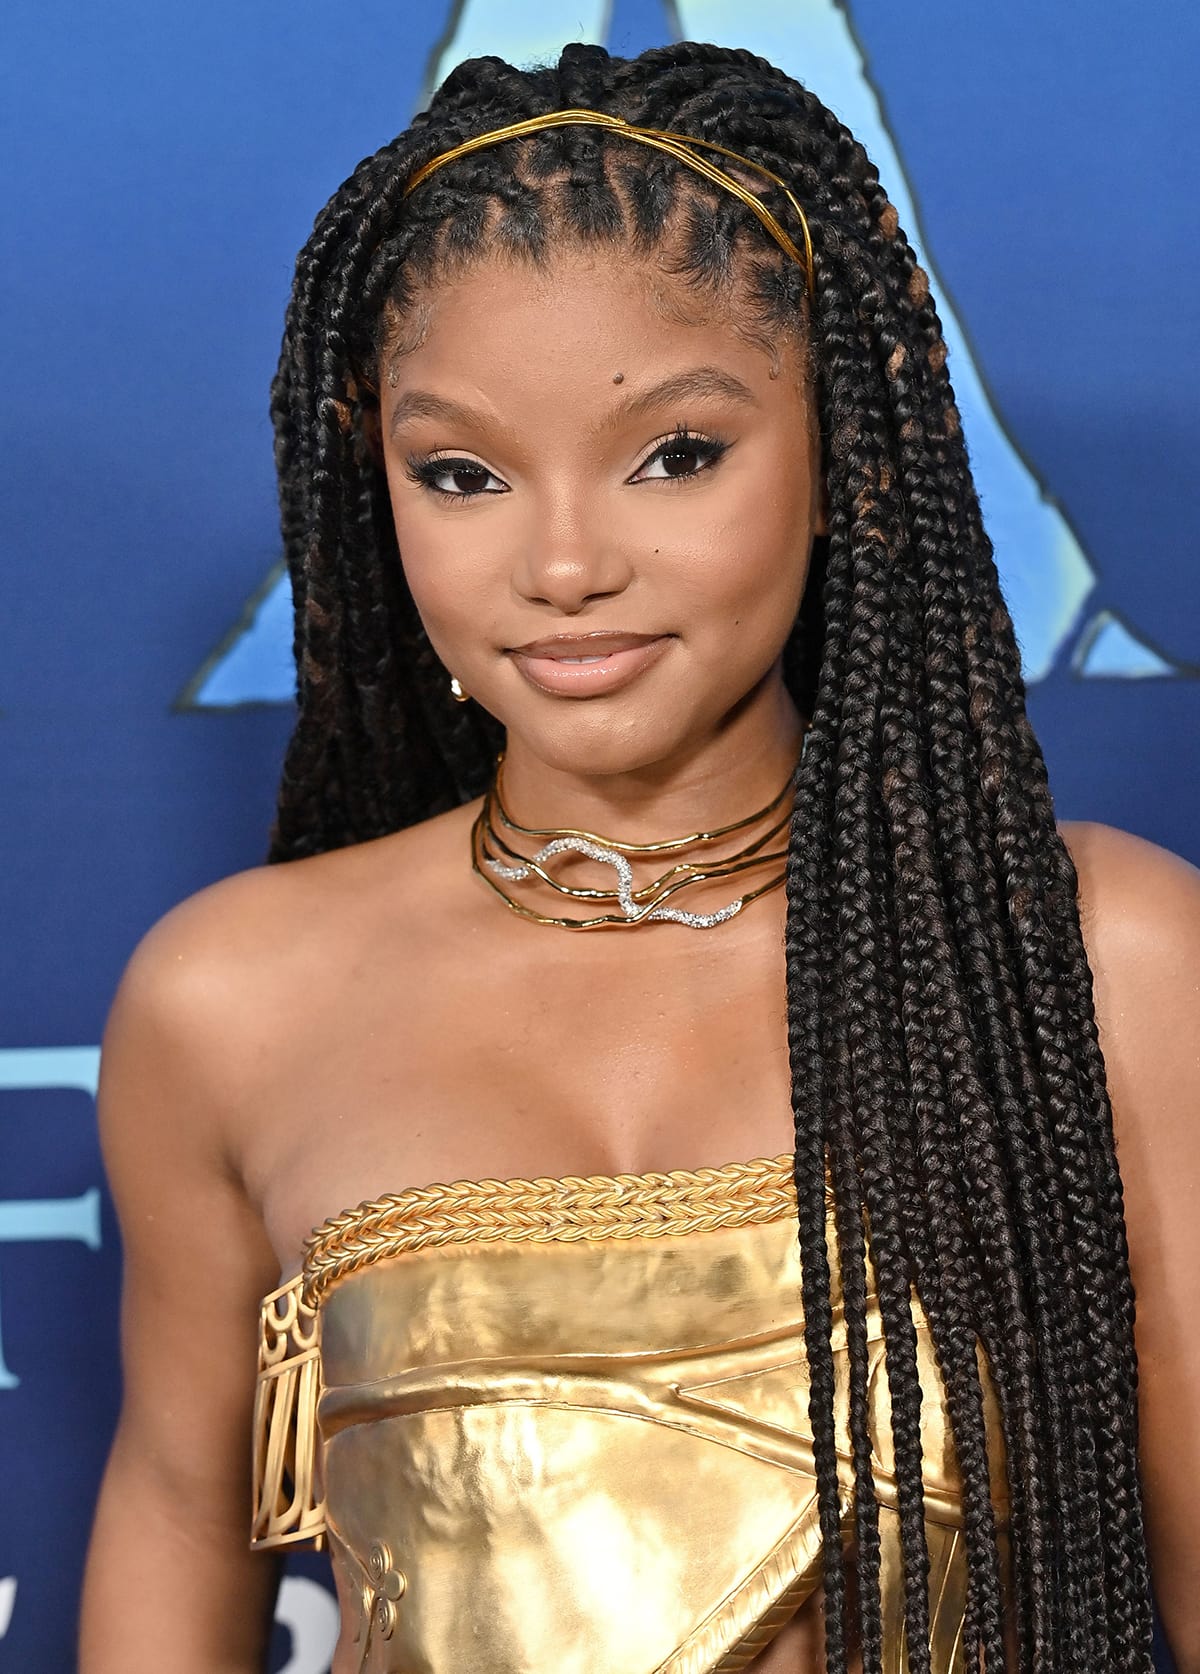 Halle Bailey wears her hair in long knotless braids and accentuates her eyes with winged eyeliner and nude lipstick